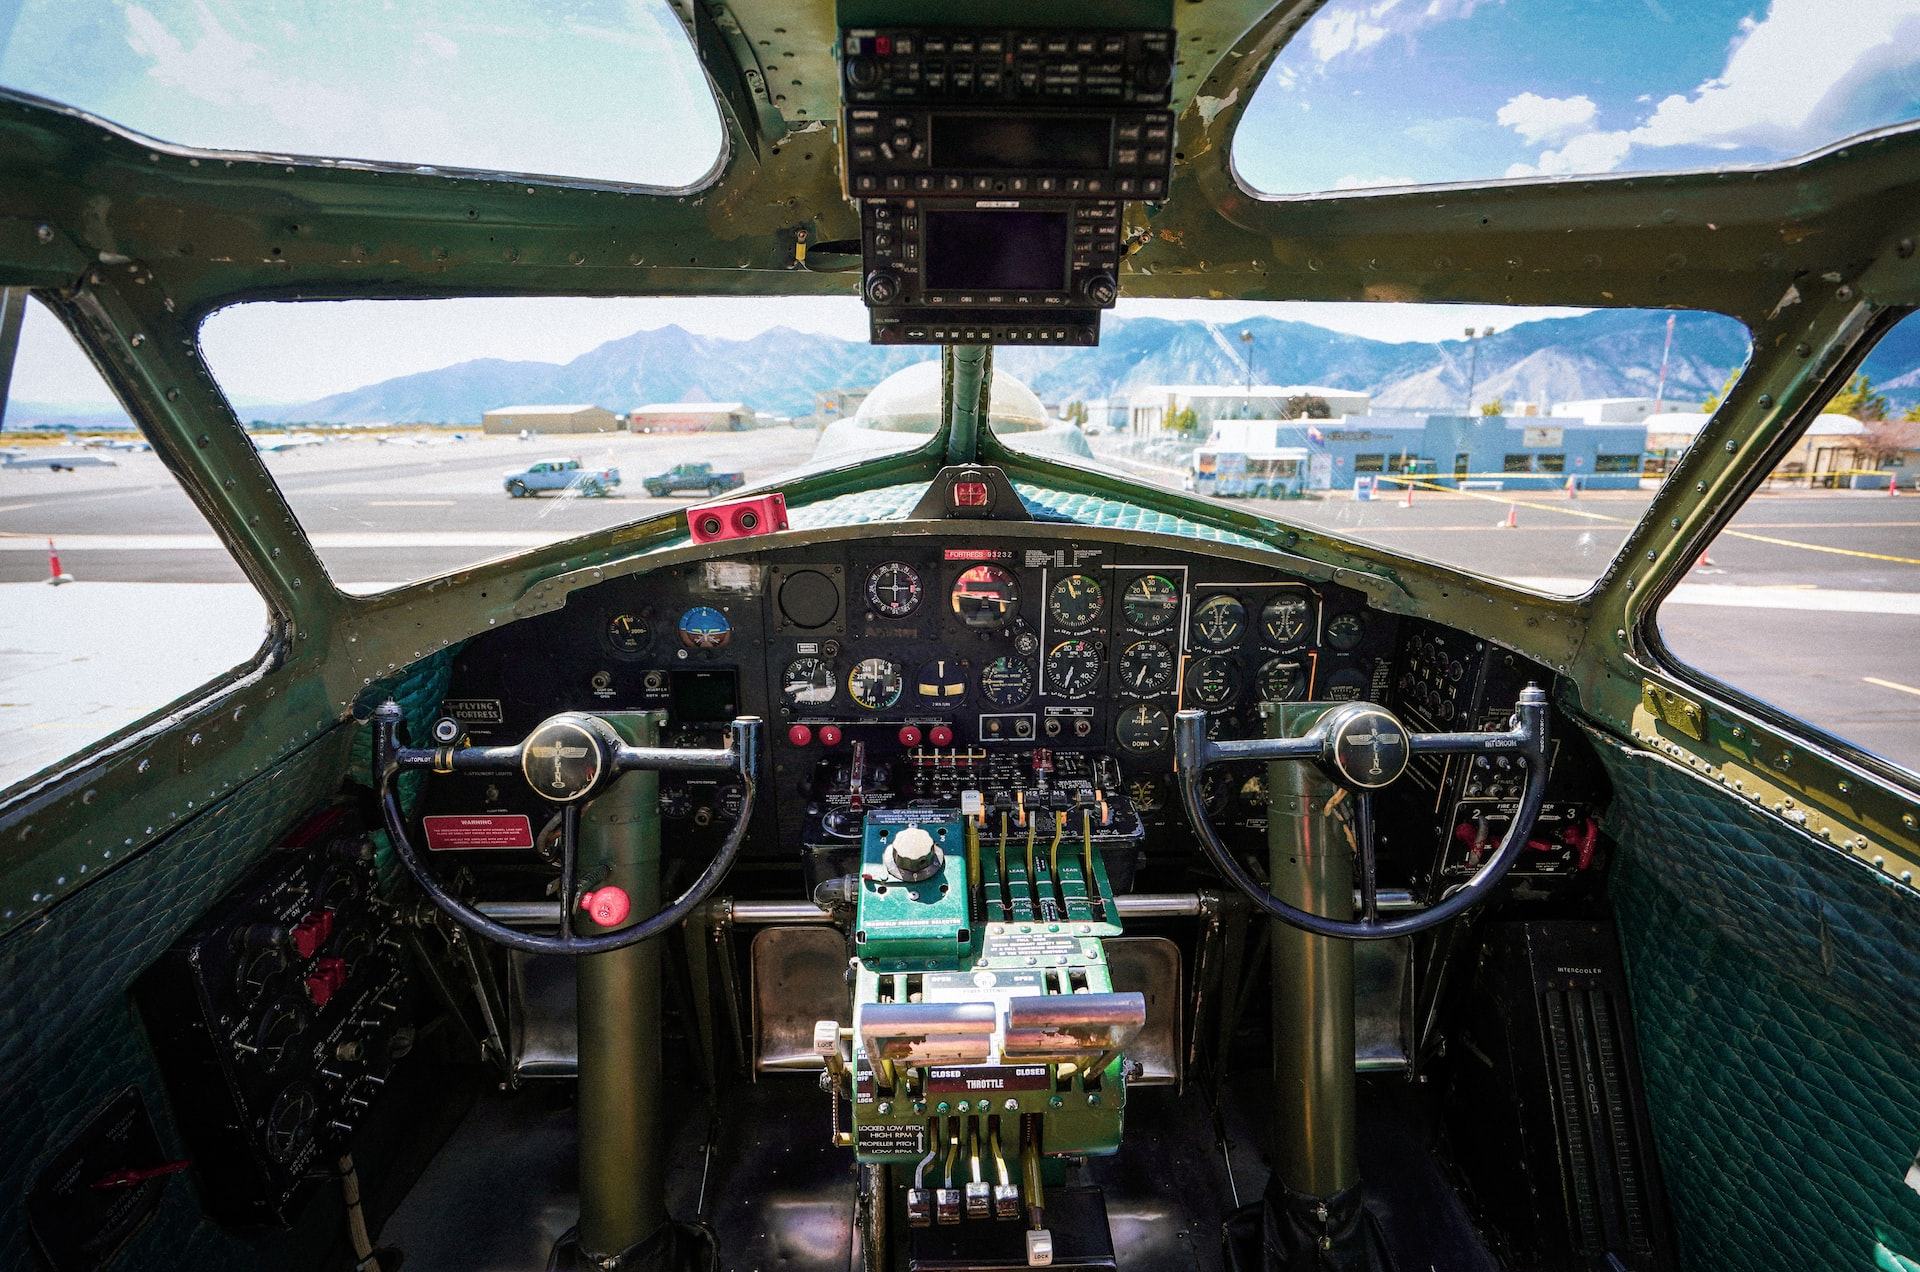 A two seater aircraft's cockpit.